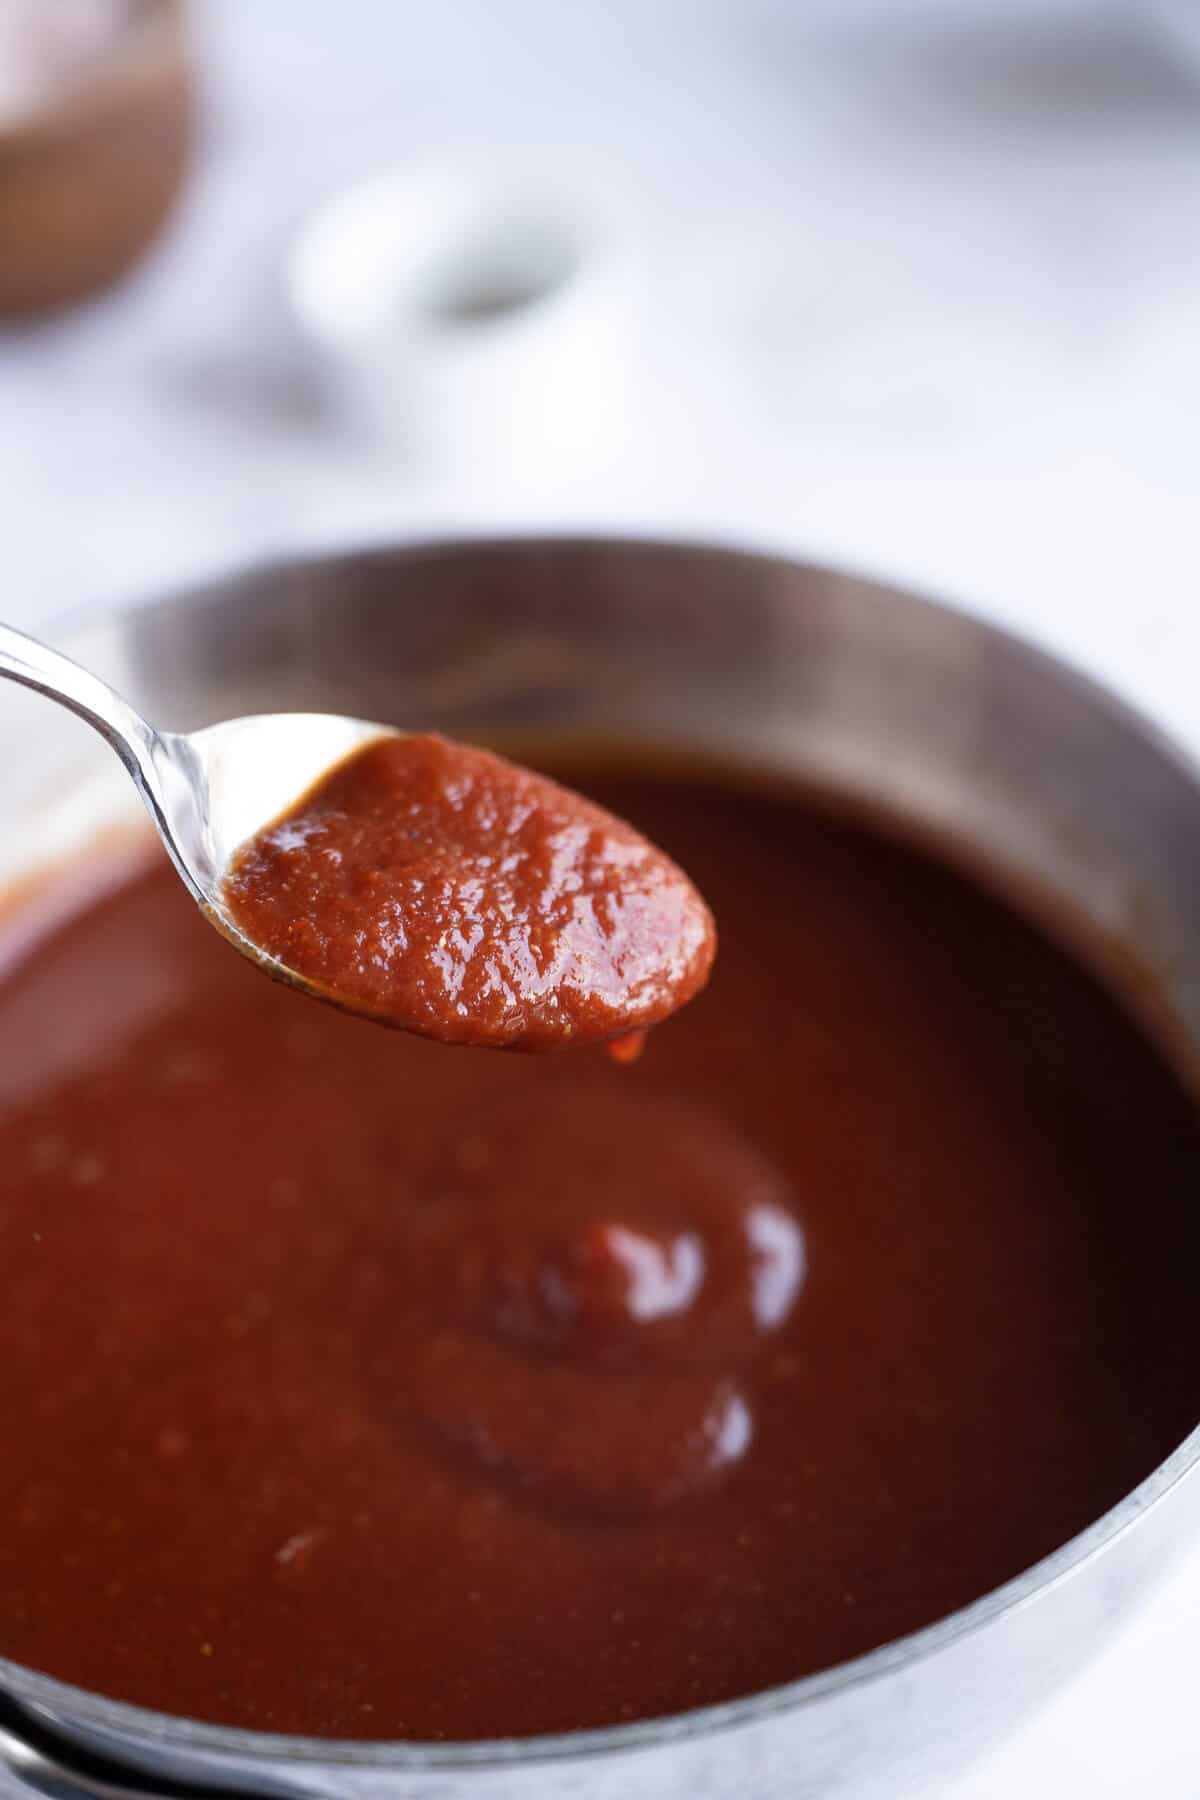 A spoonful of homemade keto barbecue sauce being held up above the pan of simmering sauce.